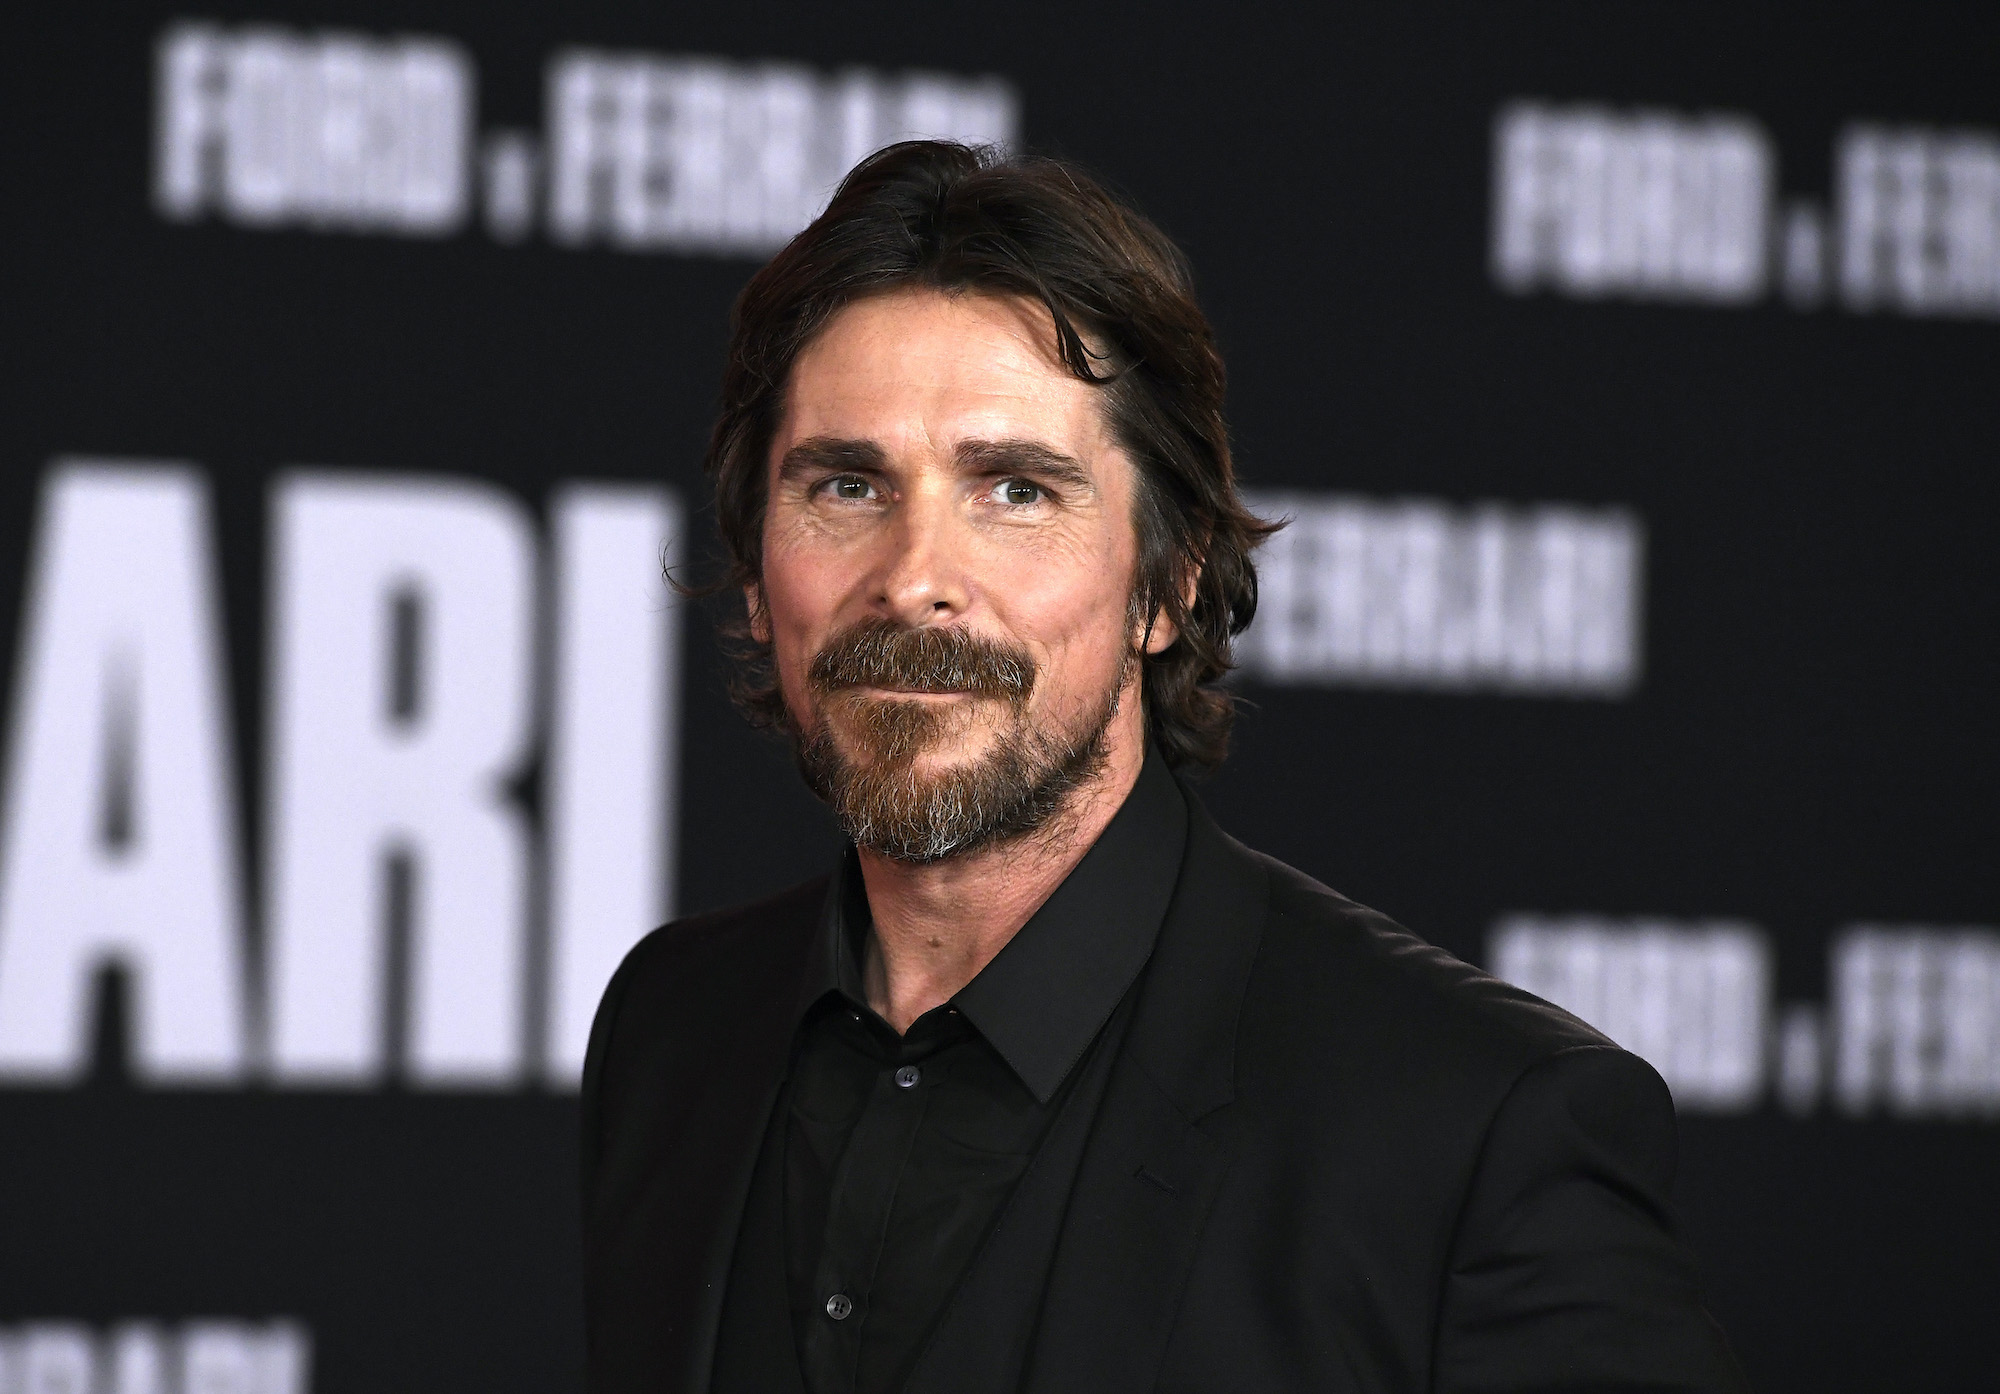 Christian Bale smiling in front of a blurred black and white background